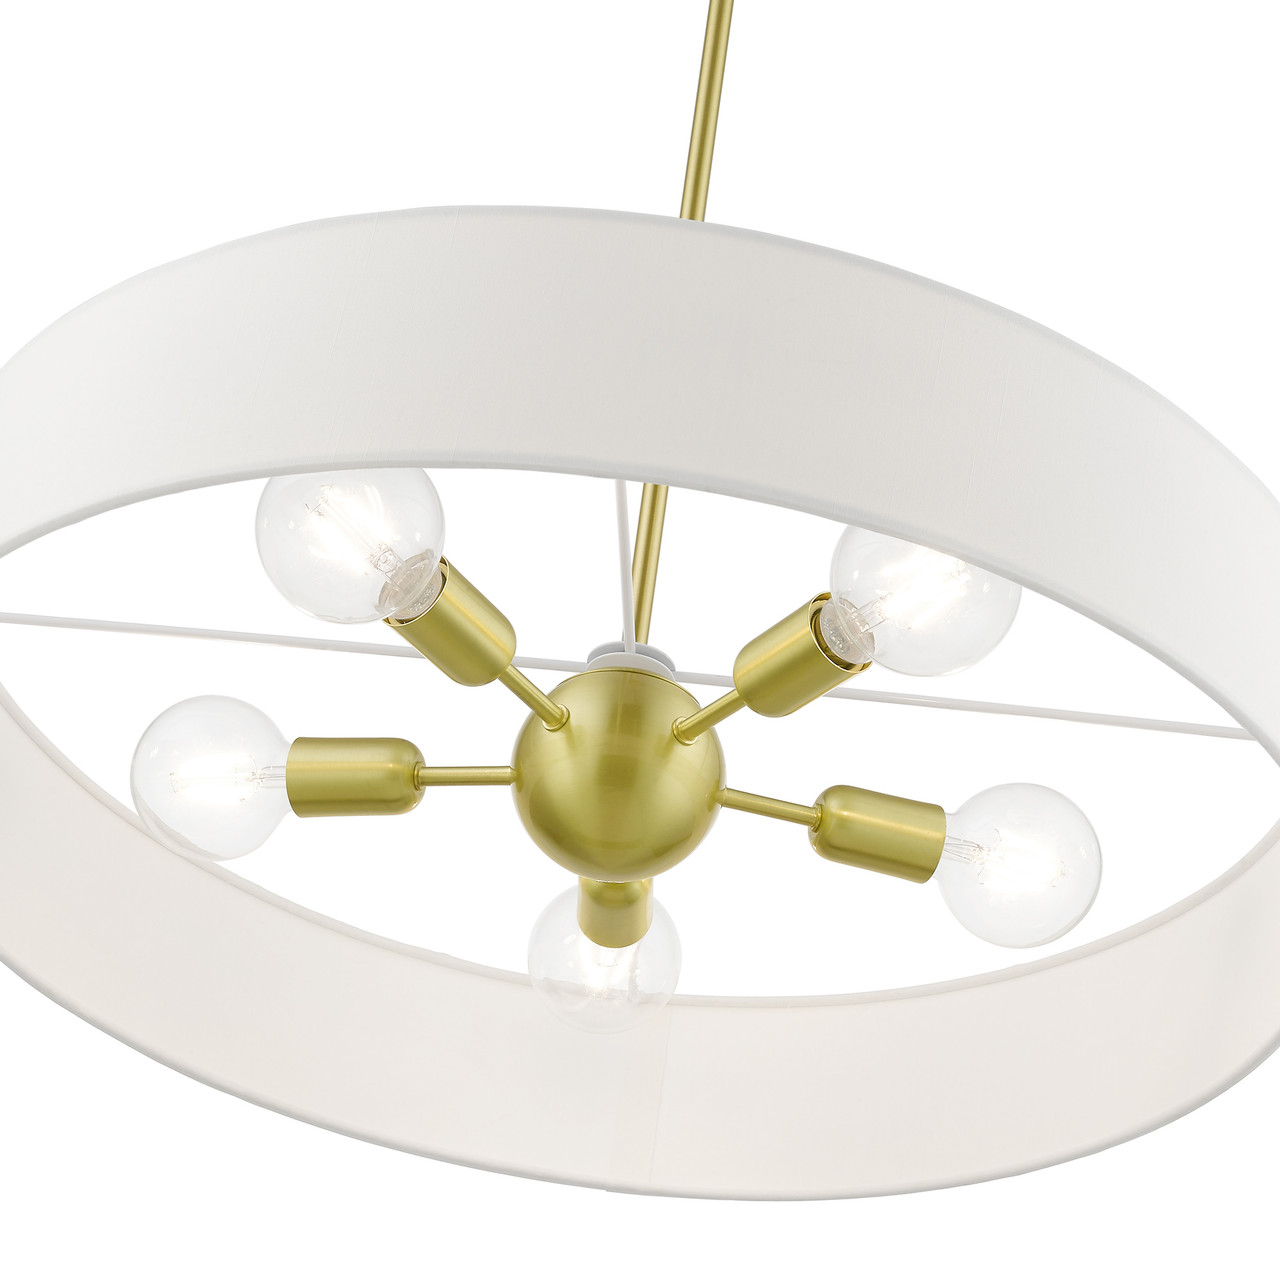 LIVEX LIGHTING 46925-12 5 Light Satin Brass with Shiny White Accents Large Drum Pendant